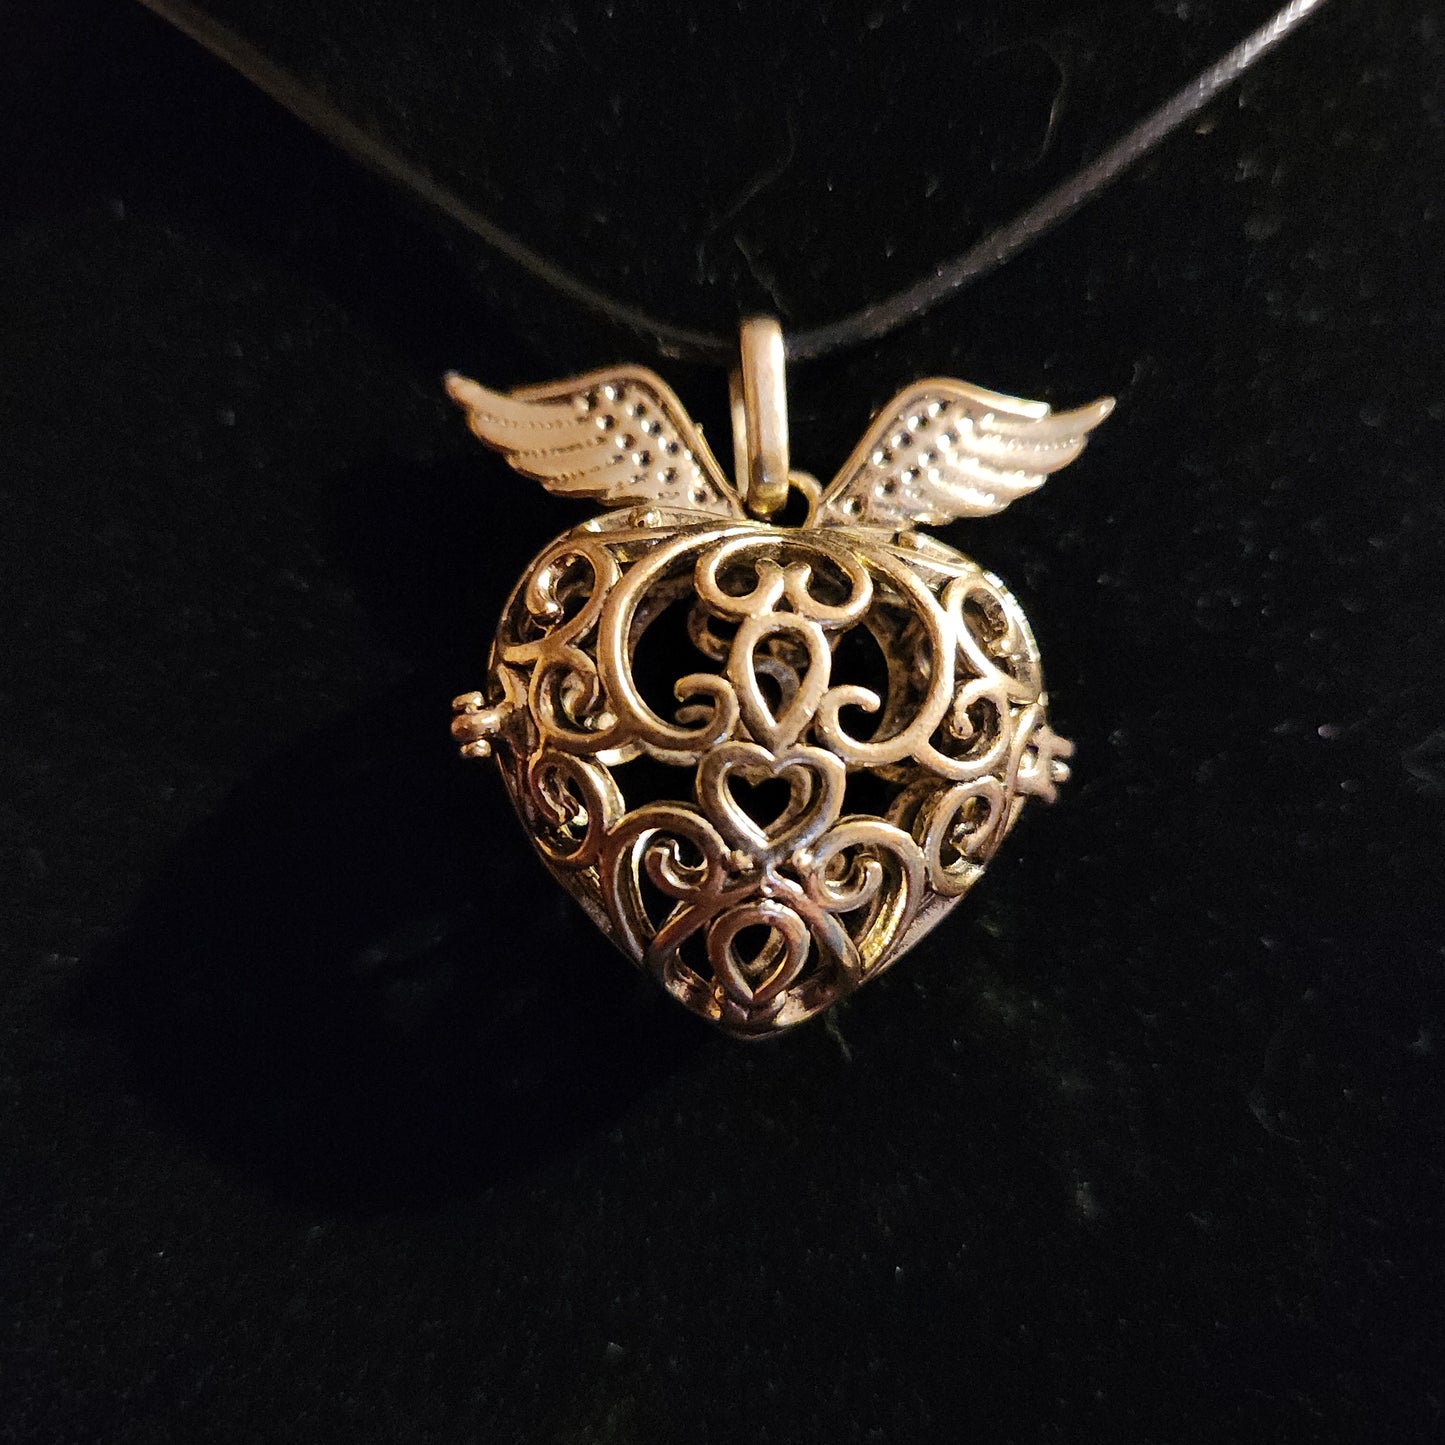 Gold tone heart with wings locket/cage necklace